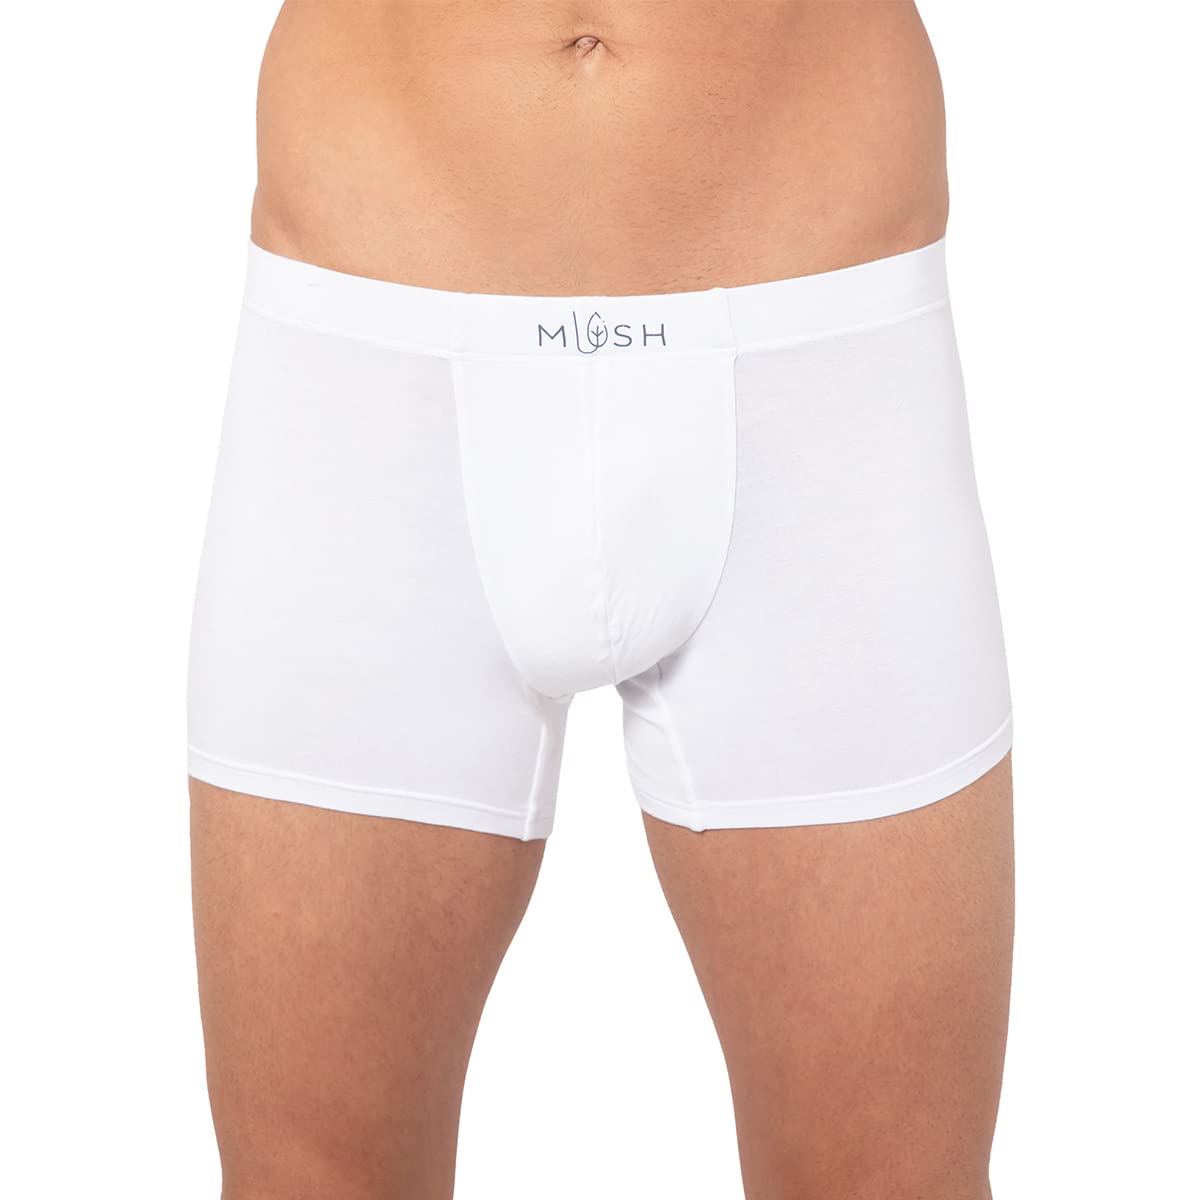 Mush Ultra Soft, Breathable, Feather Light Men's Bamboo Trunk || Naturally Anti-Odor and Anti-Microbial Bamboo Innerwear (L, White)